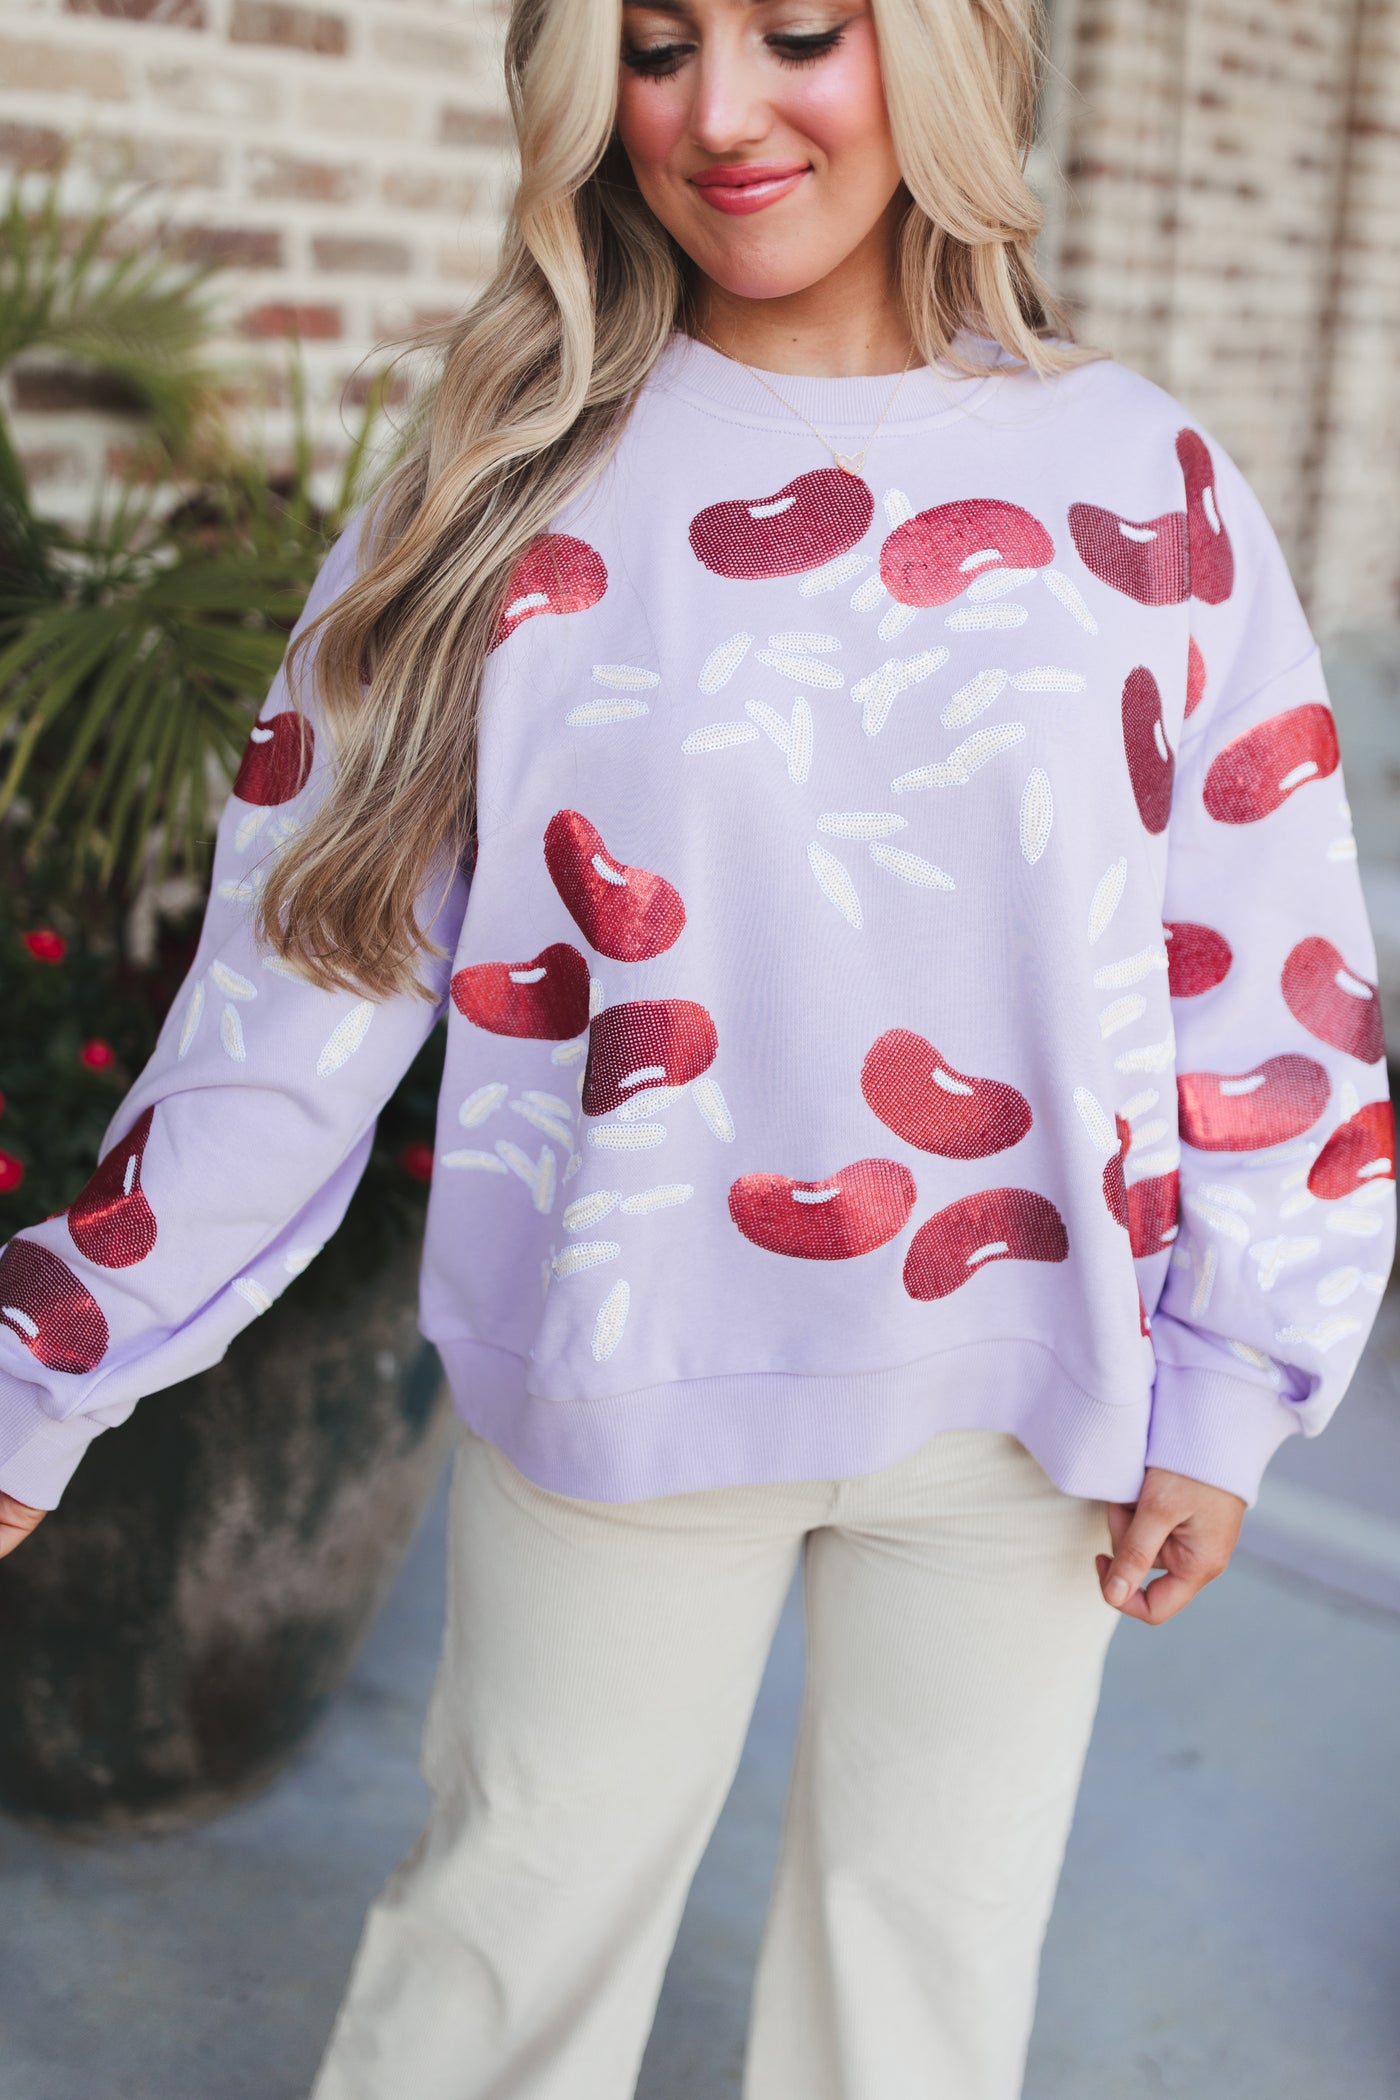 Queen Of Sparkles Lavender Red Beans & Rice Sweatshirt